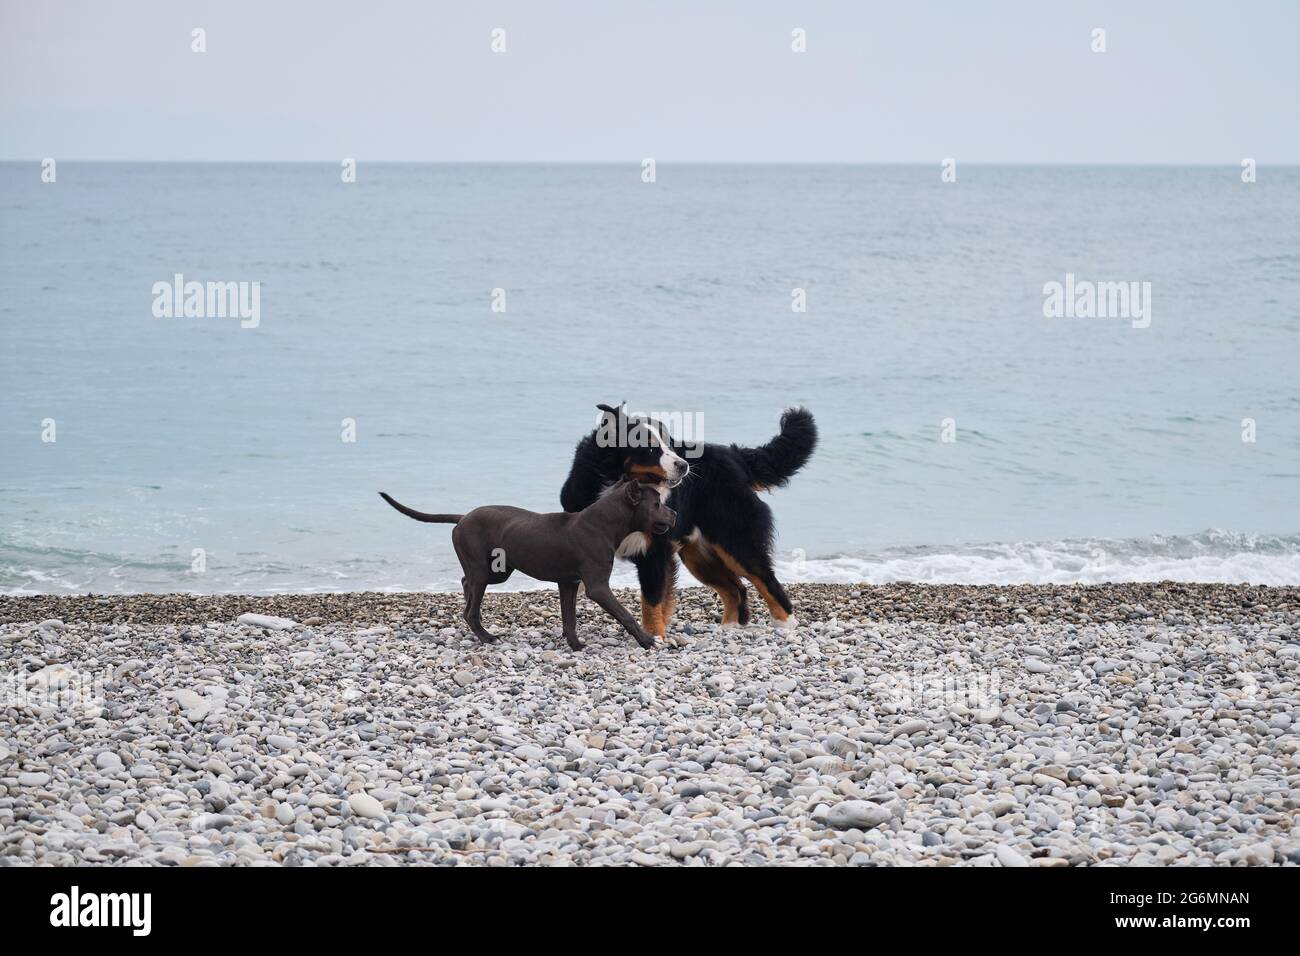 Puppy of American pit bull terrier of blue color plays with large Bernese Mountain Dog on pebble beach on coast. Two charming friendly family dog bree Stock Photo